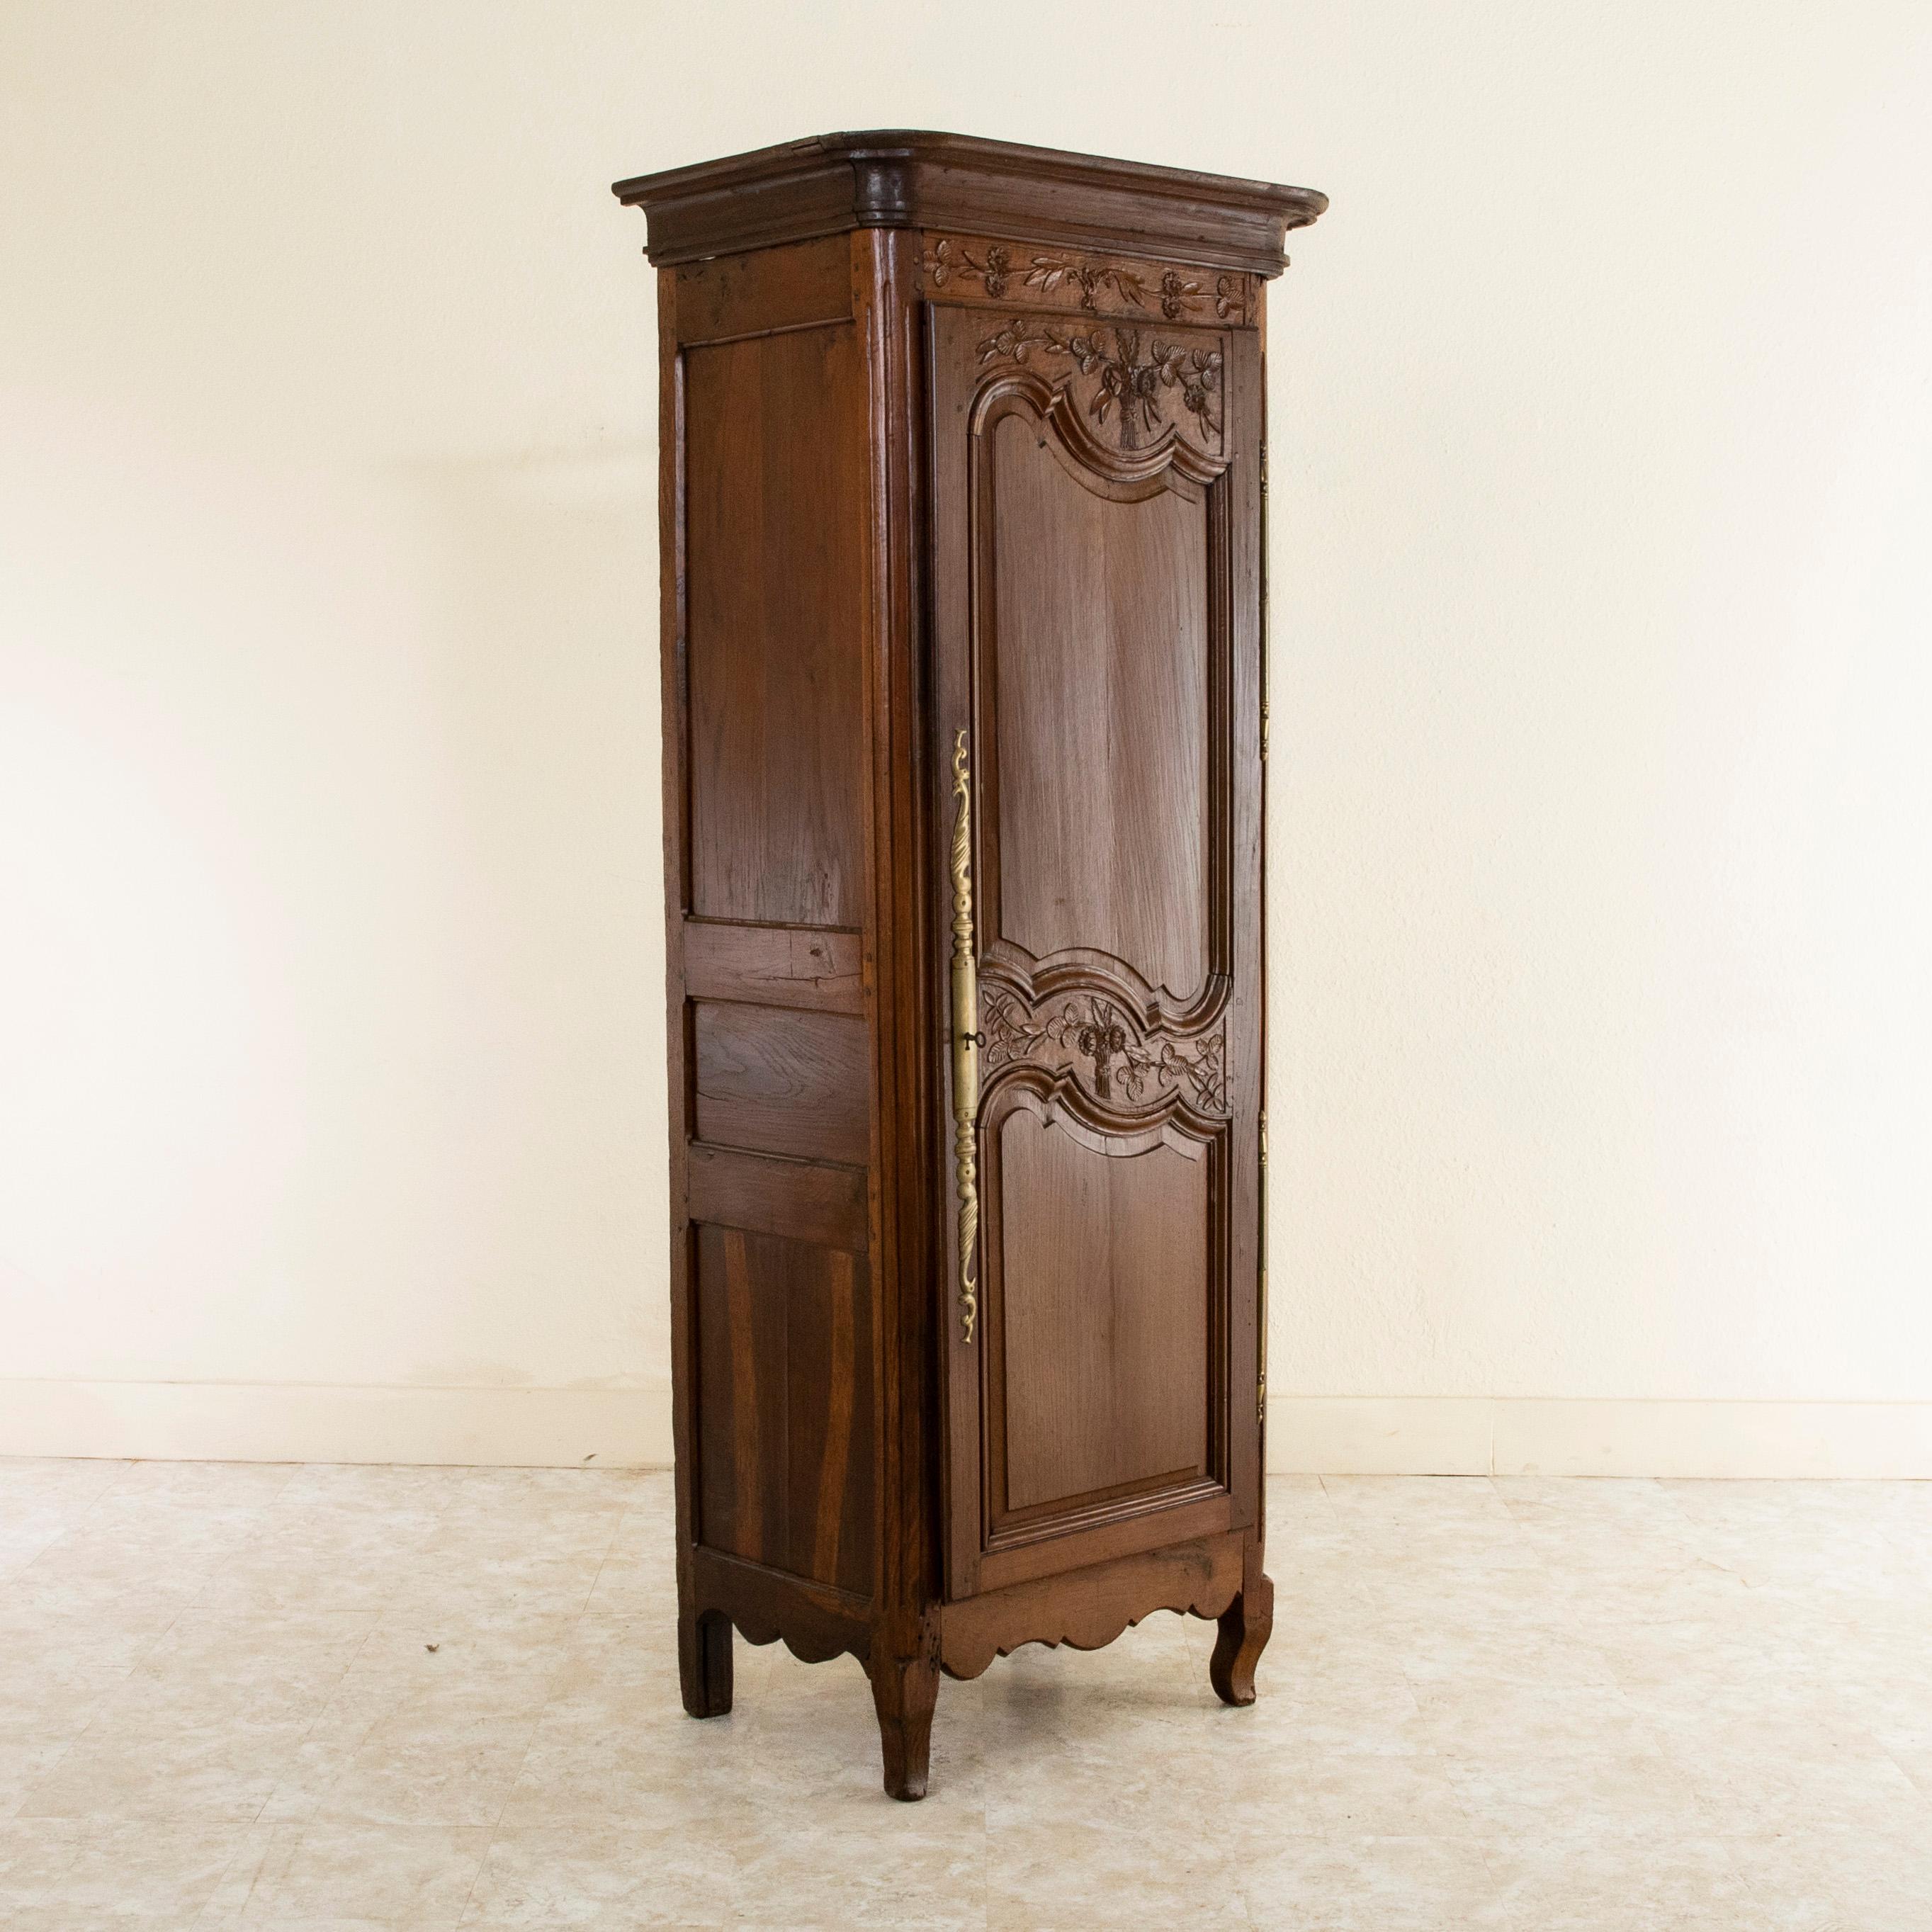 This small scale late 19th century Louis XV style bonnetiere or cabinet from Normandy, France, is constructed of solid oak with hand pegged paneled sides and hand carved detailing of leaves and flowers. Its single asymmetrical door detailed with